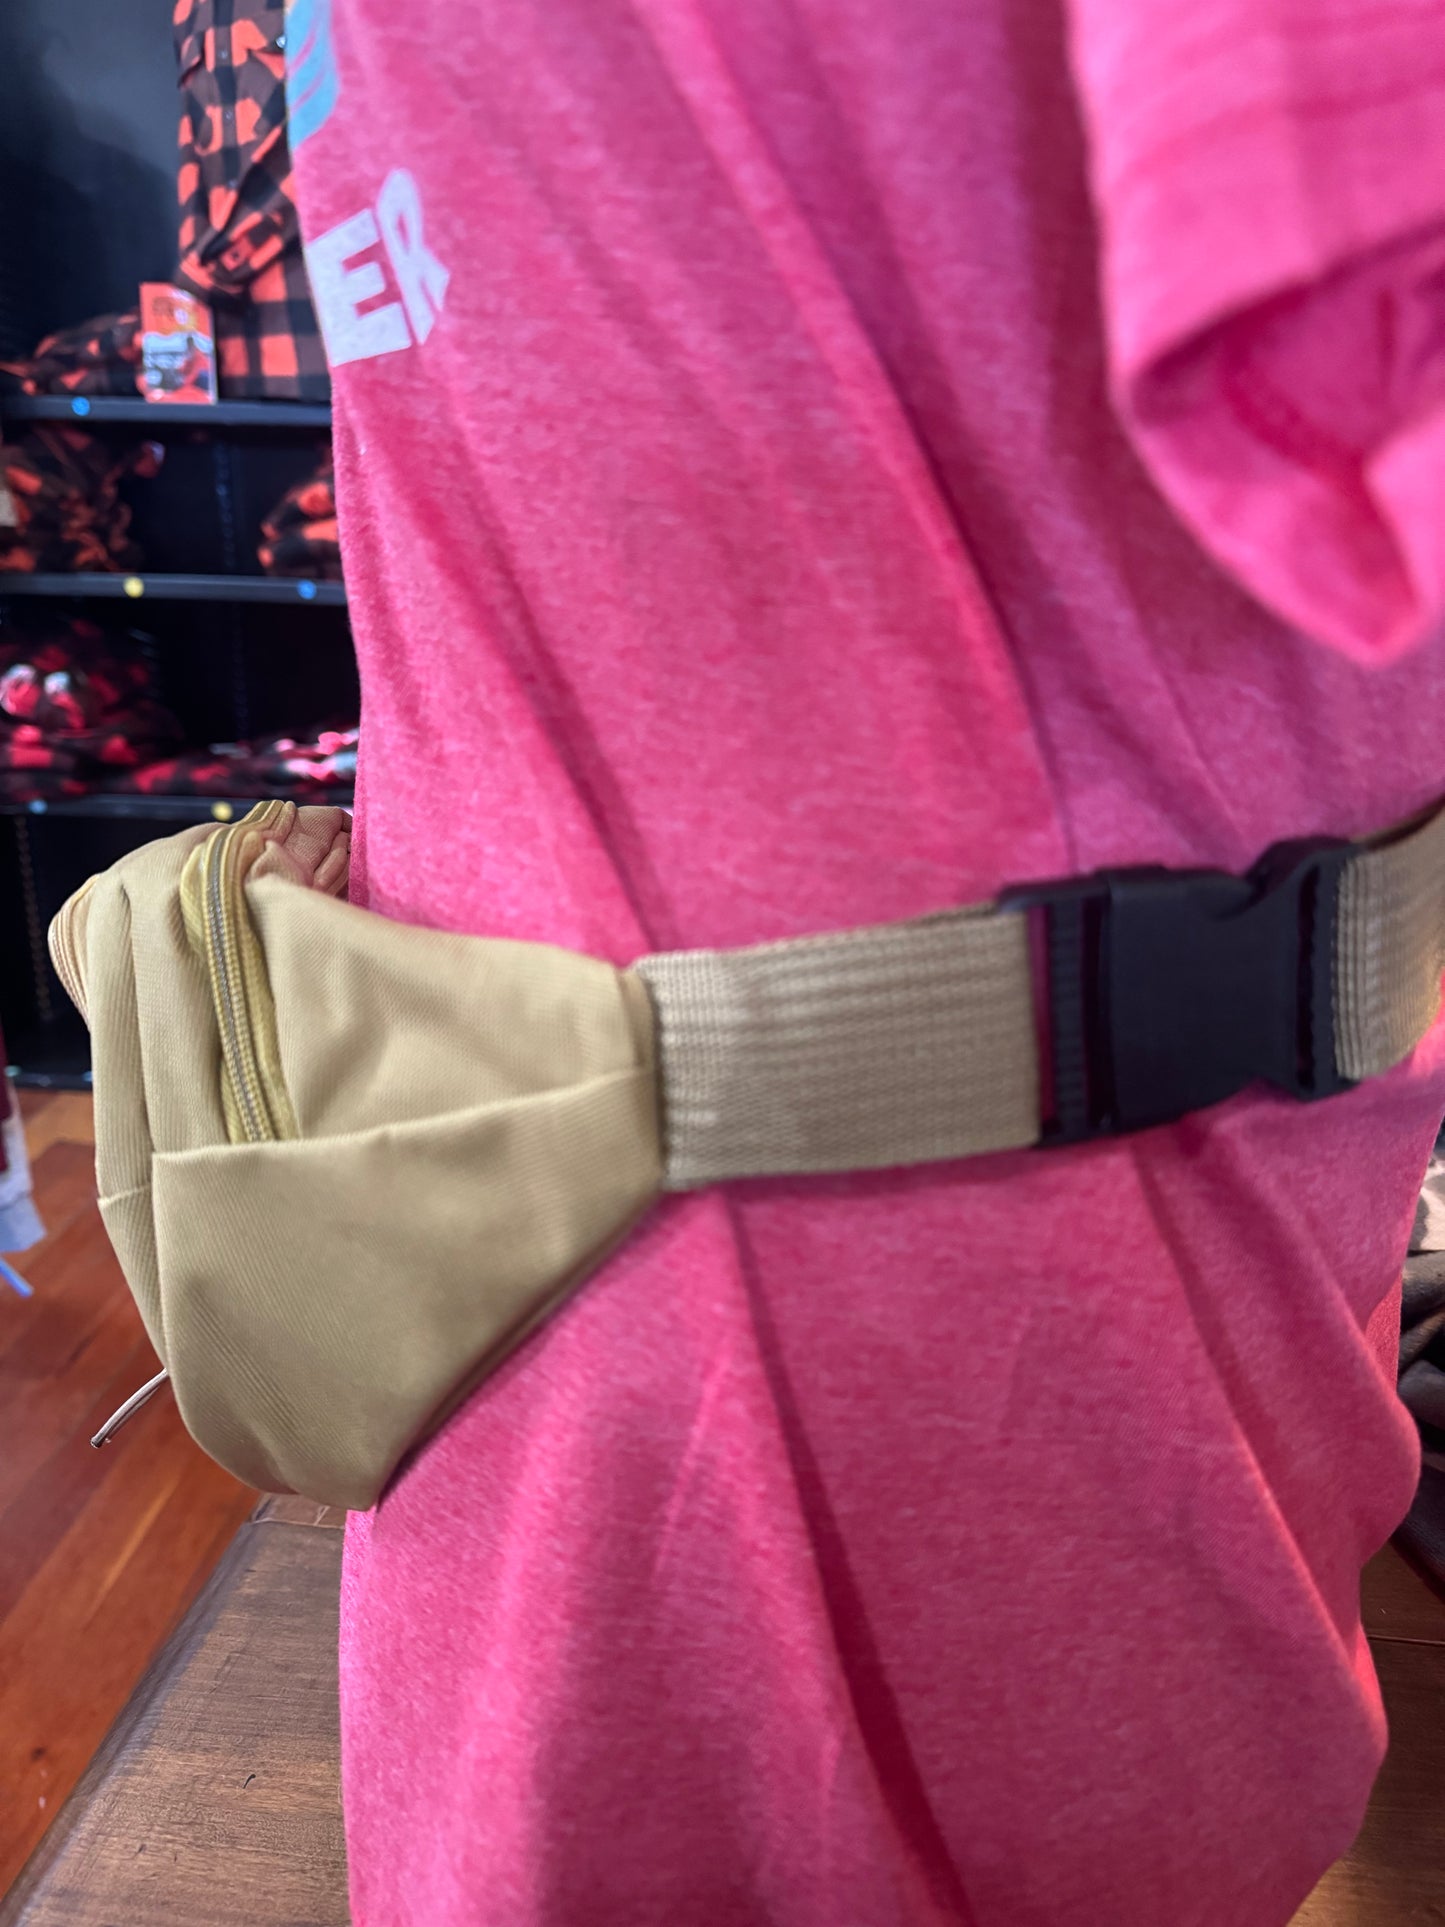 Tactile Fanny Pack or Cross Body